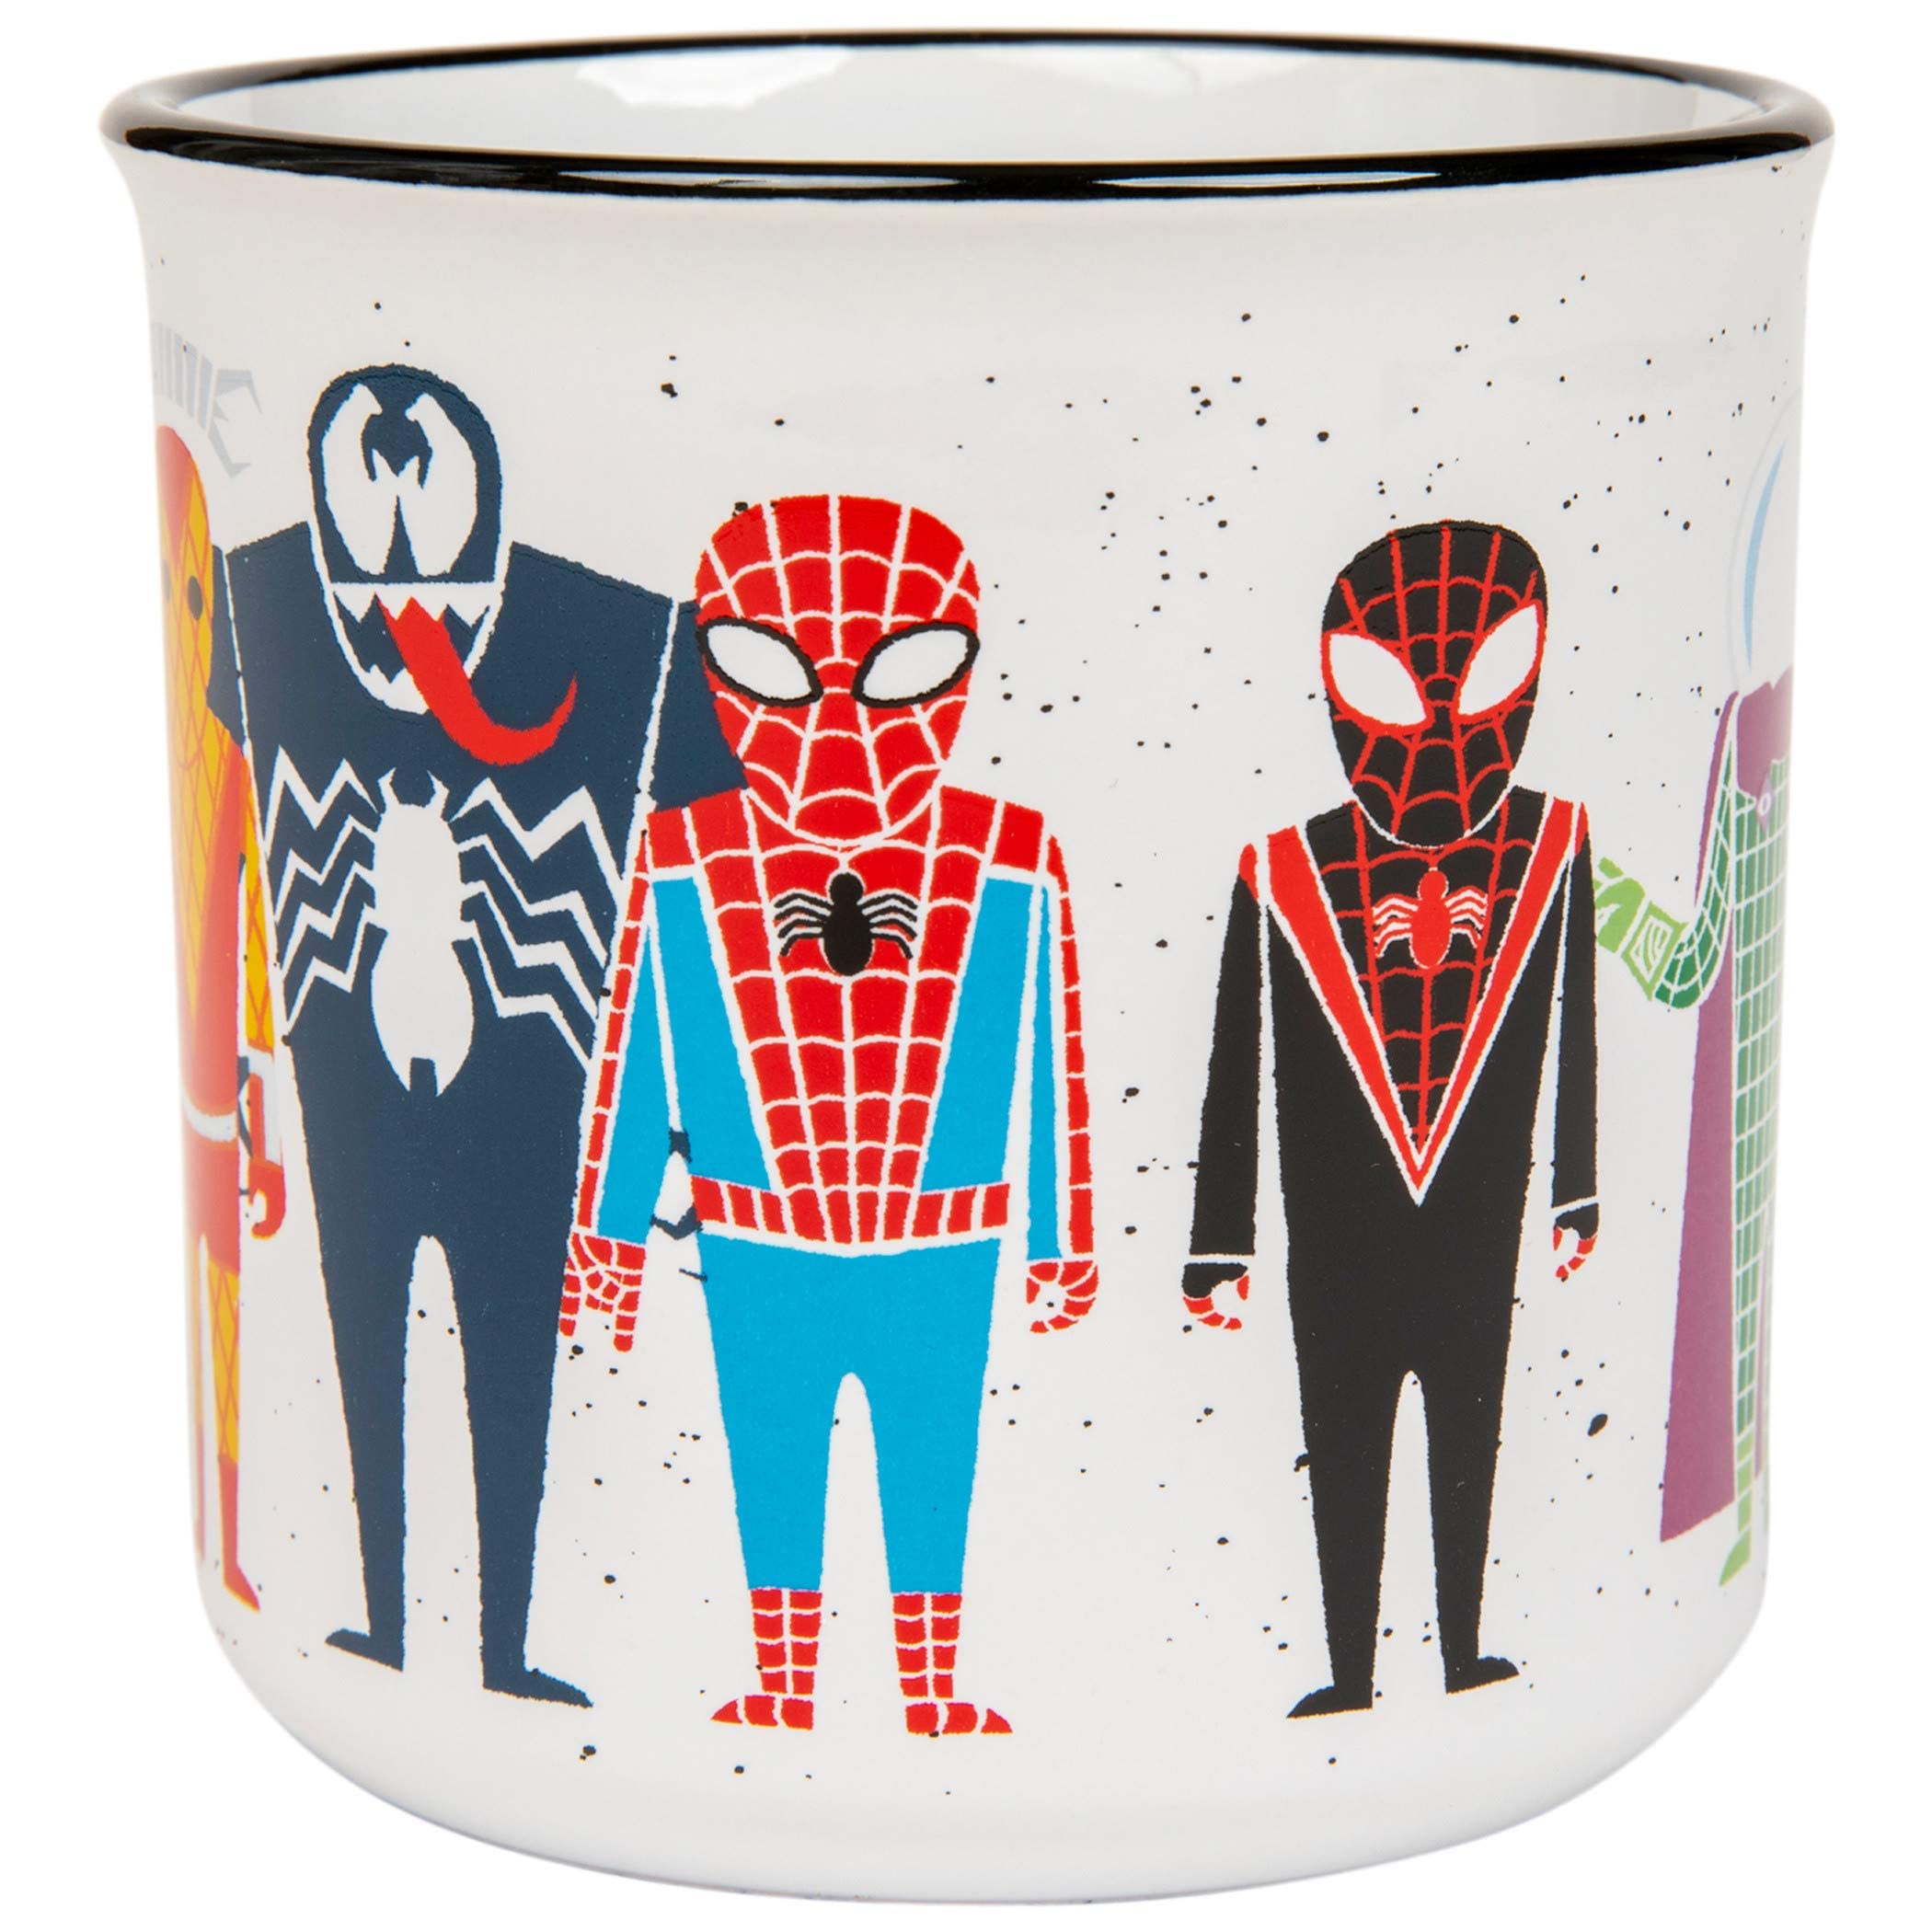 20-Oz Silver Buffalo Marvel Comics Spider-Man and Villains Ceramic Camper-Style Coffee Mug $7.50 + Free Shipping w/ Prime or on $35+